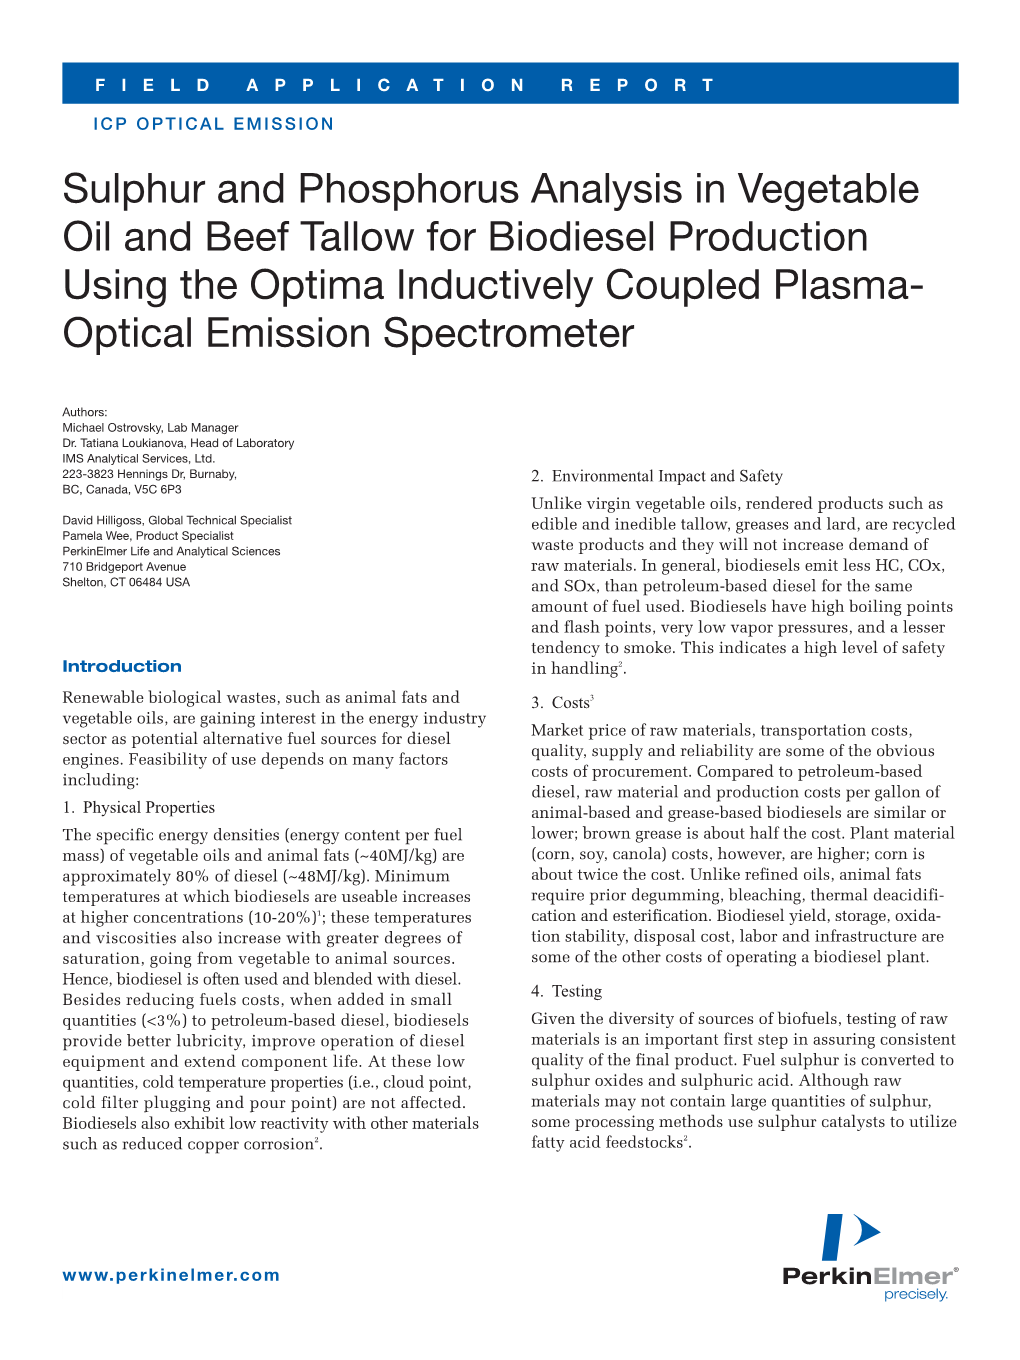 Sulphur and Phosphorus Analysis in Vegetable Oil and Beef Tallow for Biodiesel Production Using the Optima Inductively Coupled Plasma- Optical Emission Spectrometer